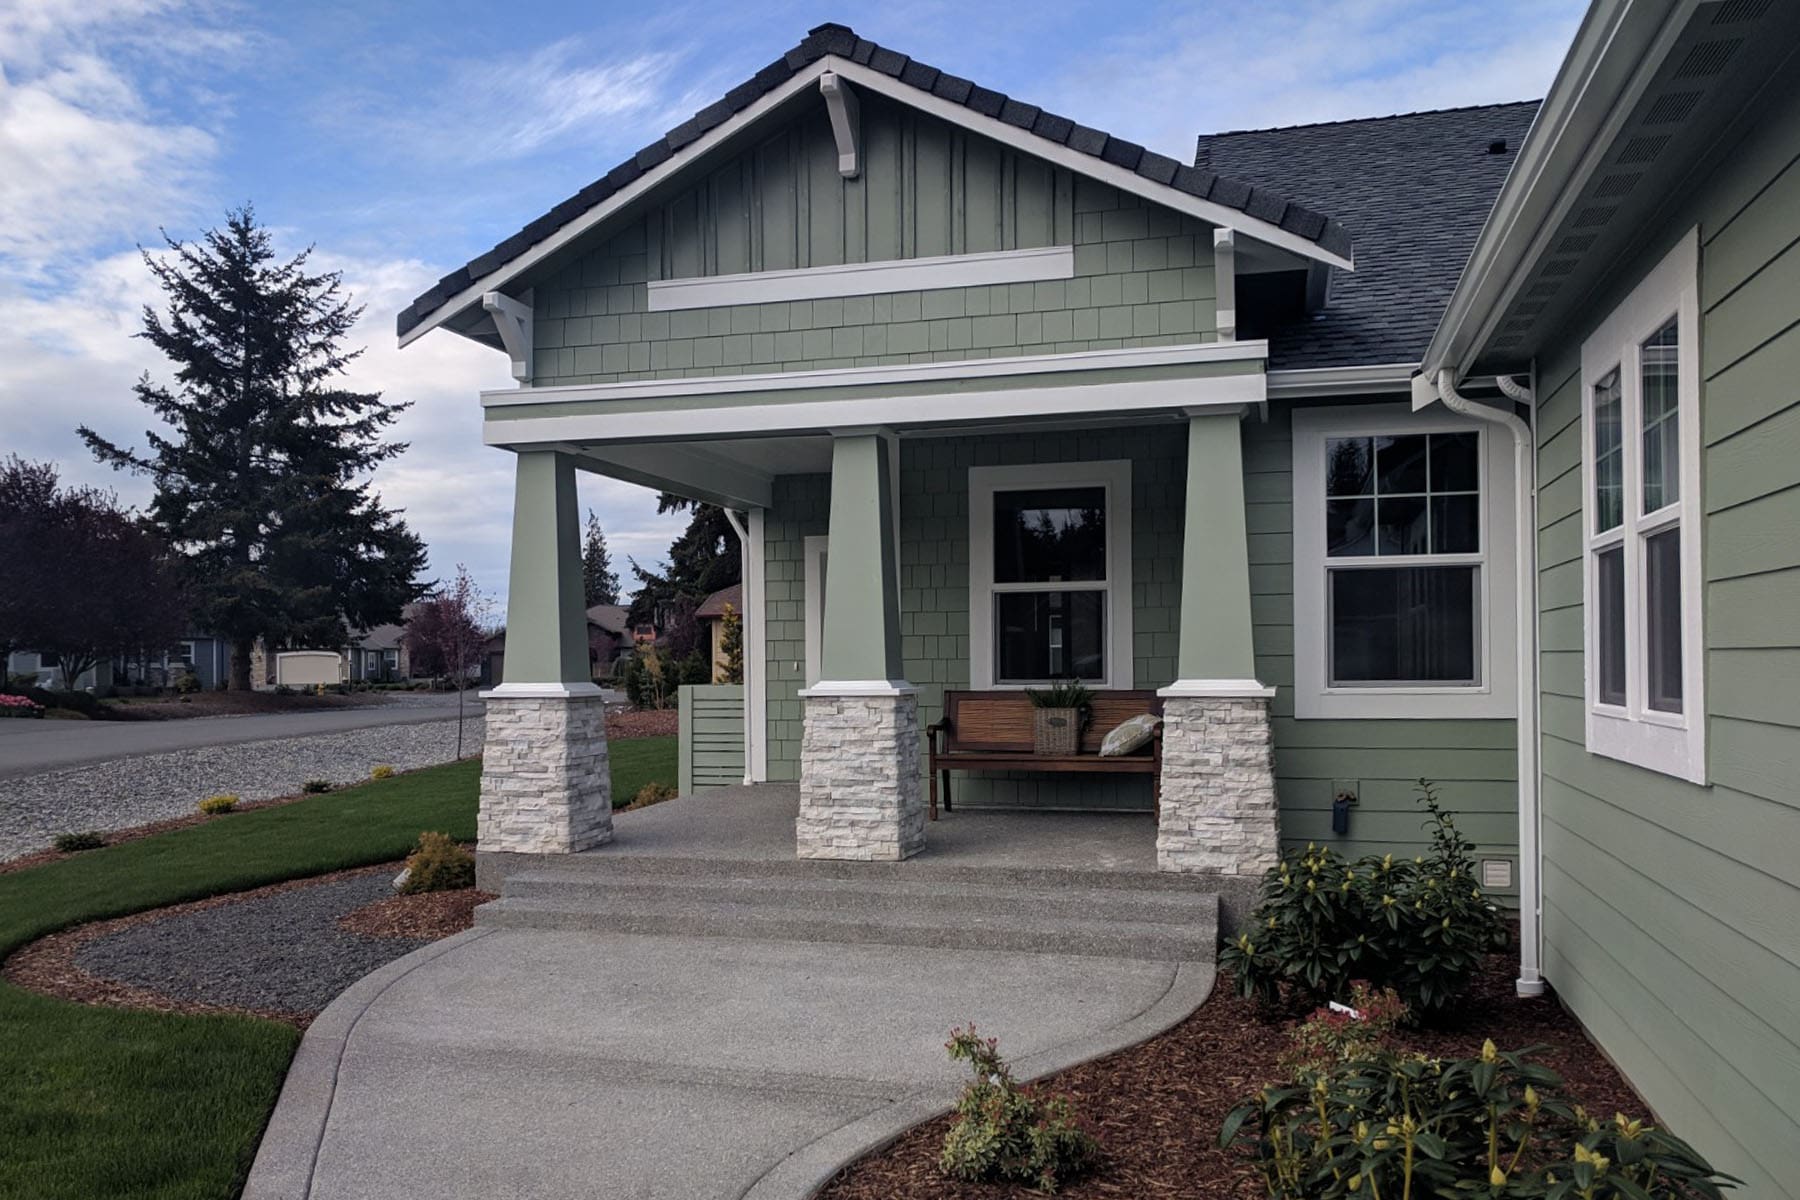 Final Homes in Sequim’s Sunland North Community Nearing Completion